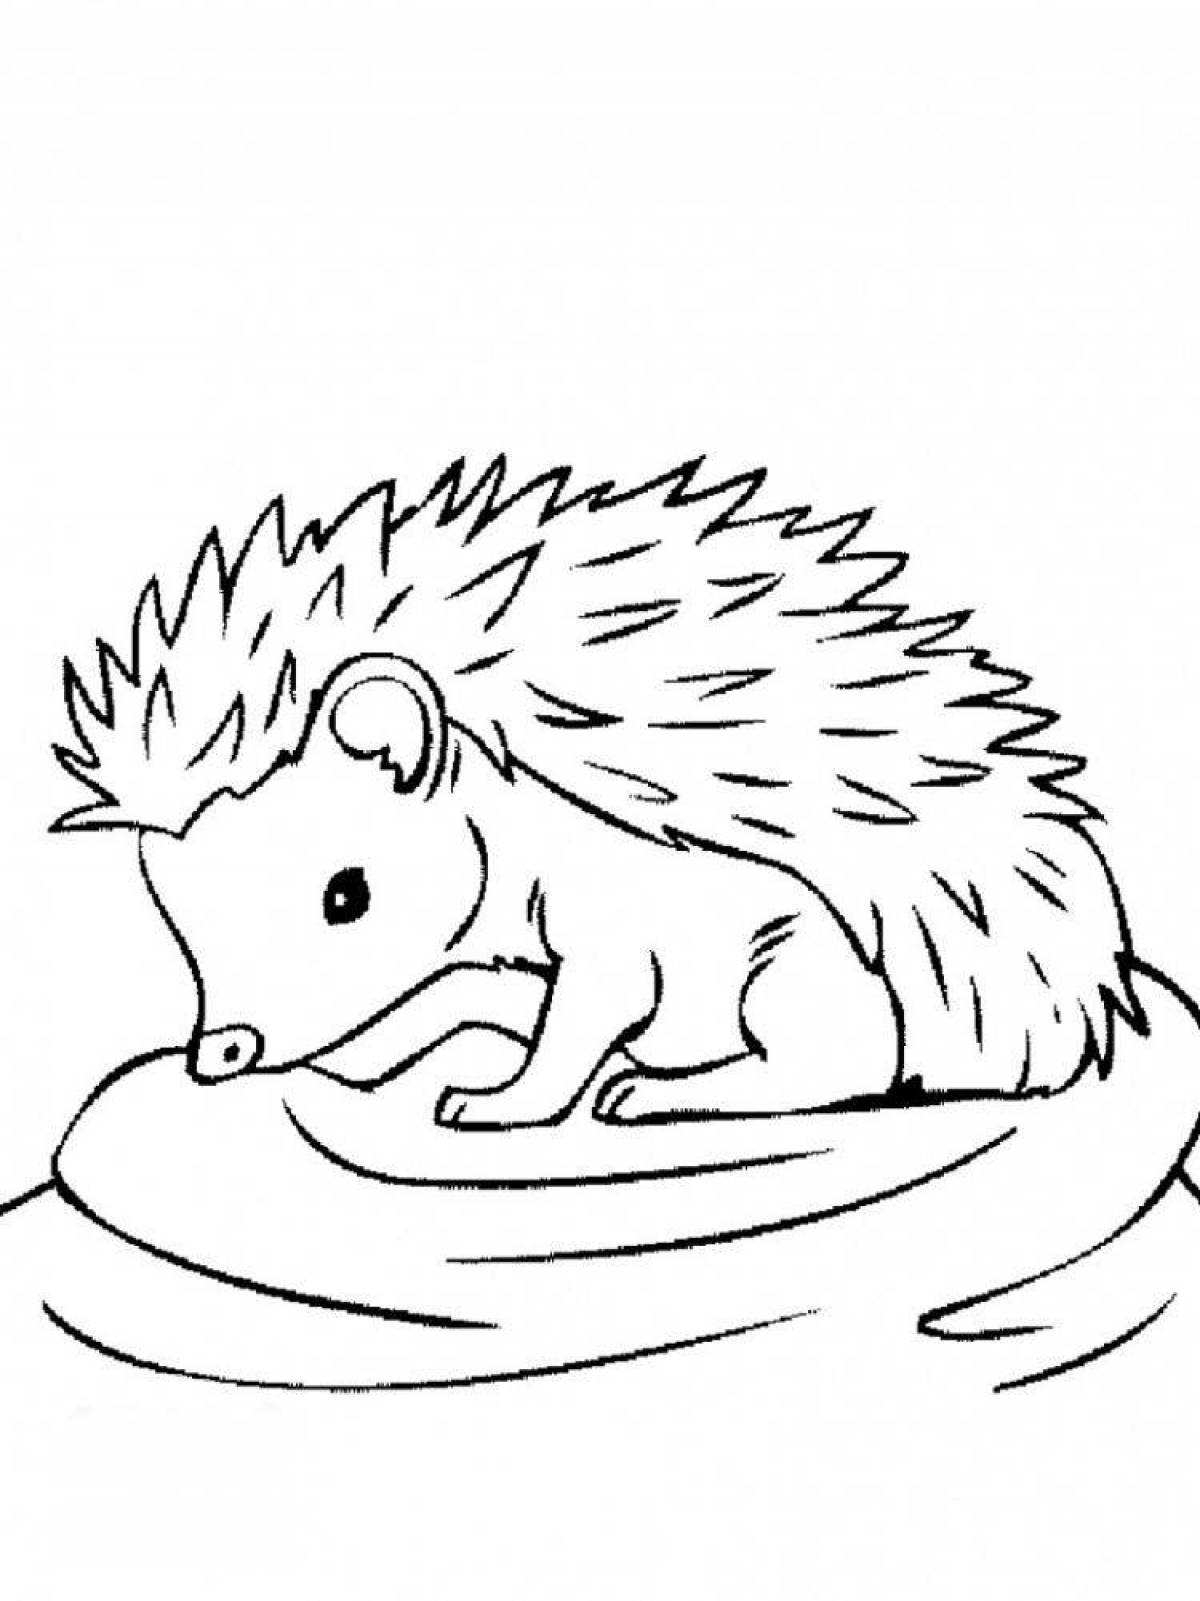 A fascinating drawing of a hedgehog